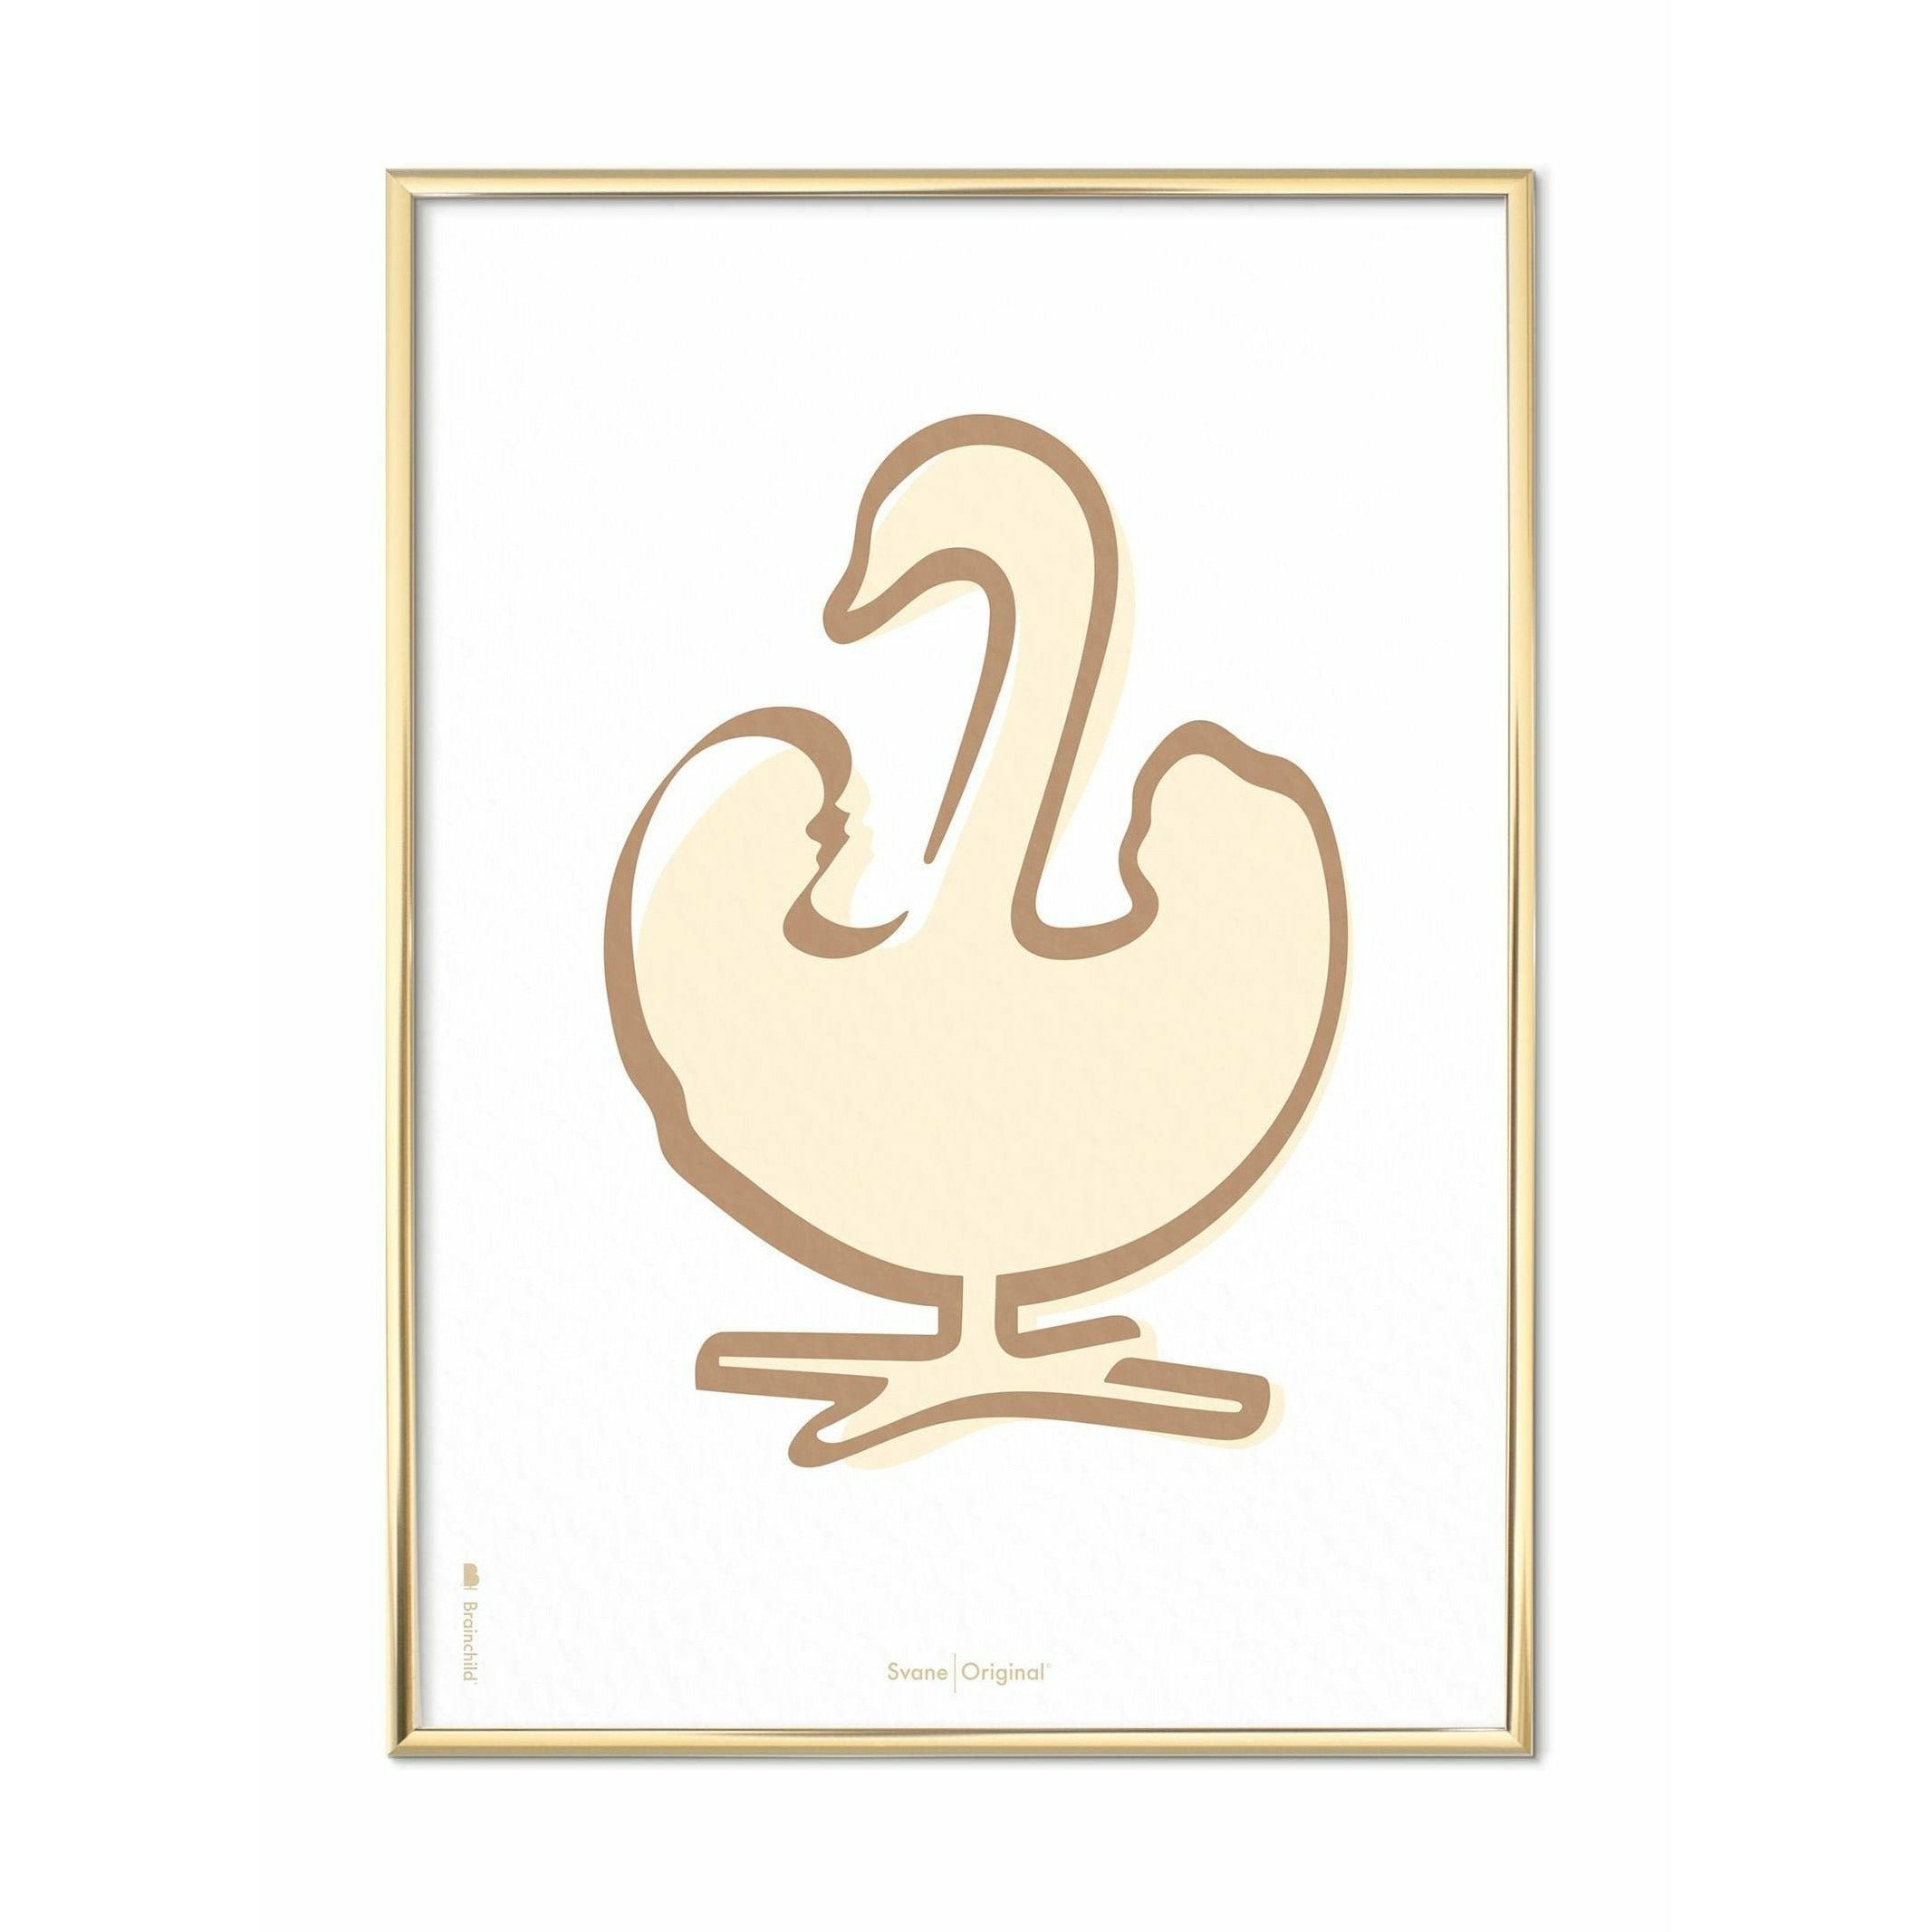 Brainchild Swan Line Poster, Brass Colored Frame A5, White Background